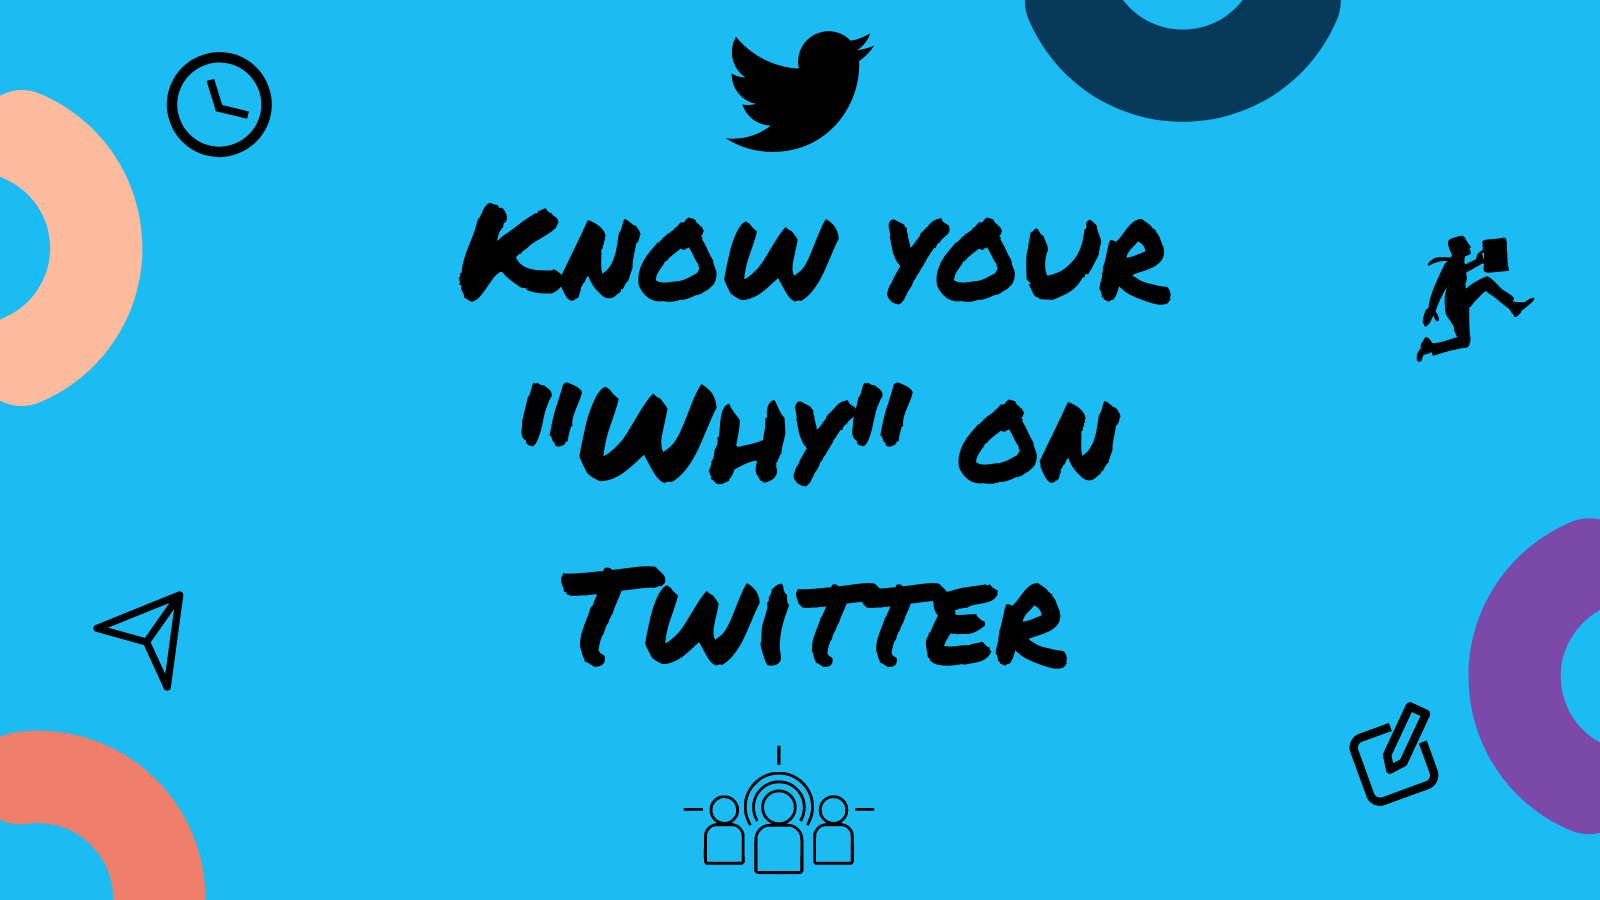 Know your â€œWhyâ€� on Twitter